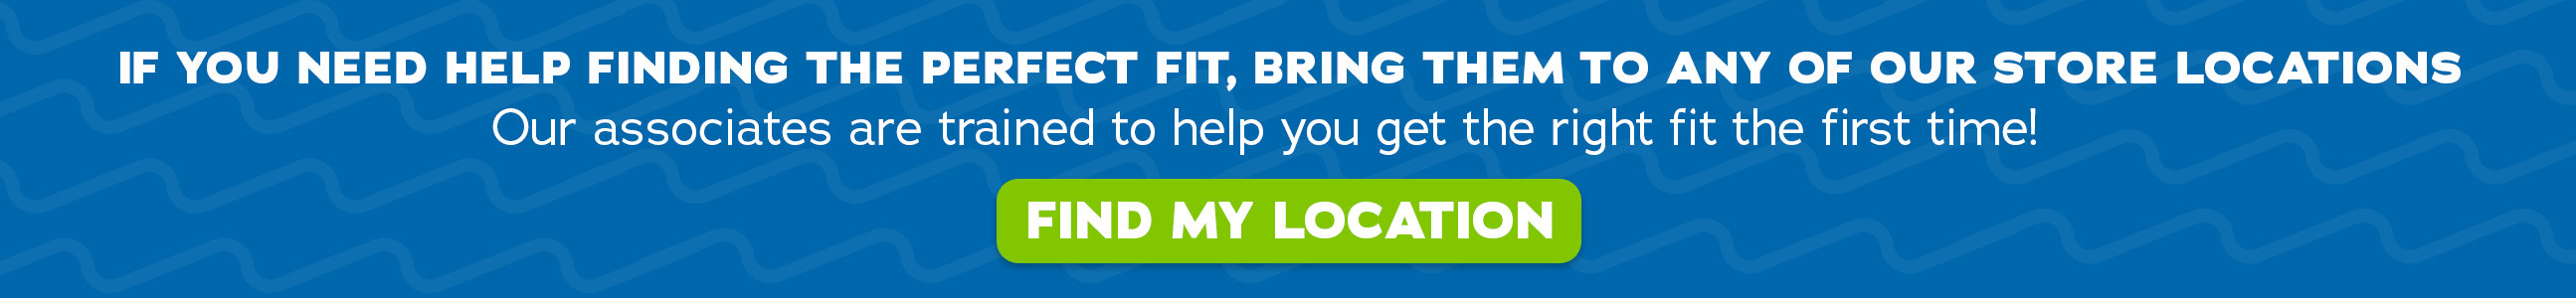 IF you need help finding the perfect fit, bring them to any of our store locations. Our associates are trained to help you get the right fit the first time! - Find my location